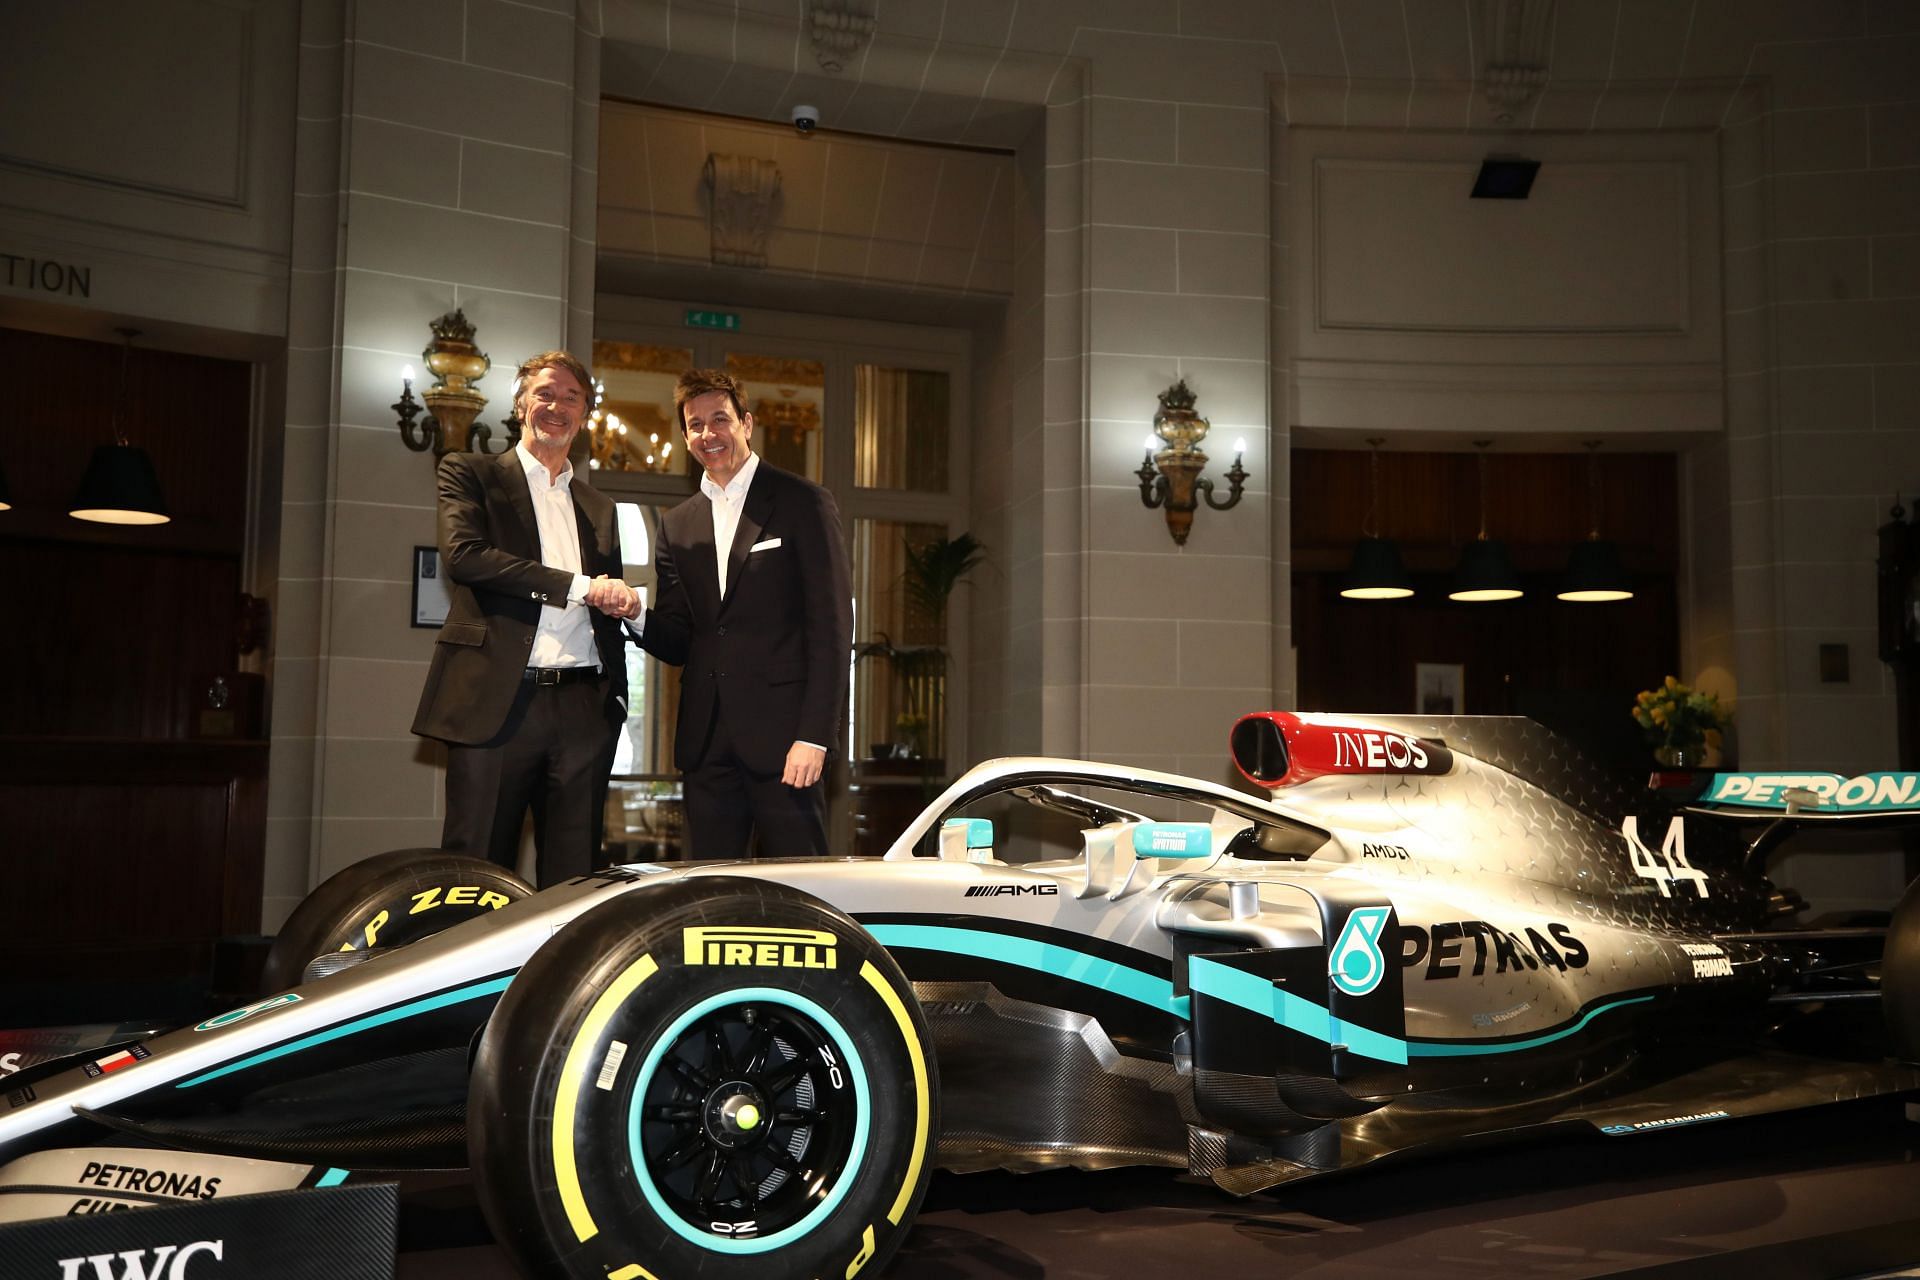 The partnership between Mercedes, Petronas, and Ineos has been a long-term and successful arrangement